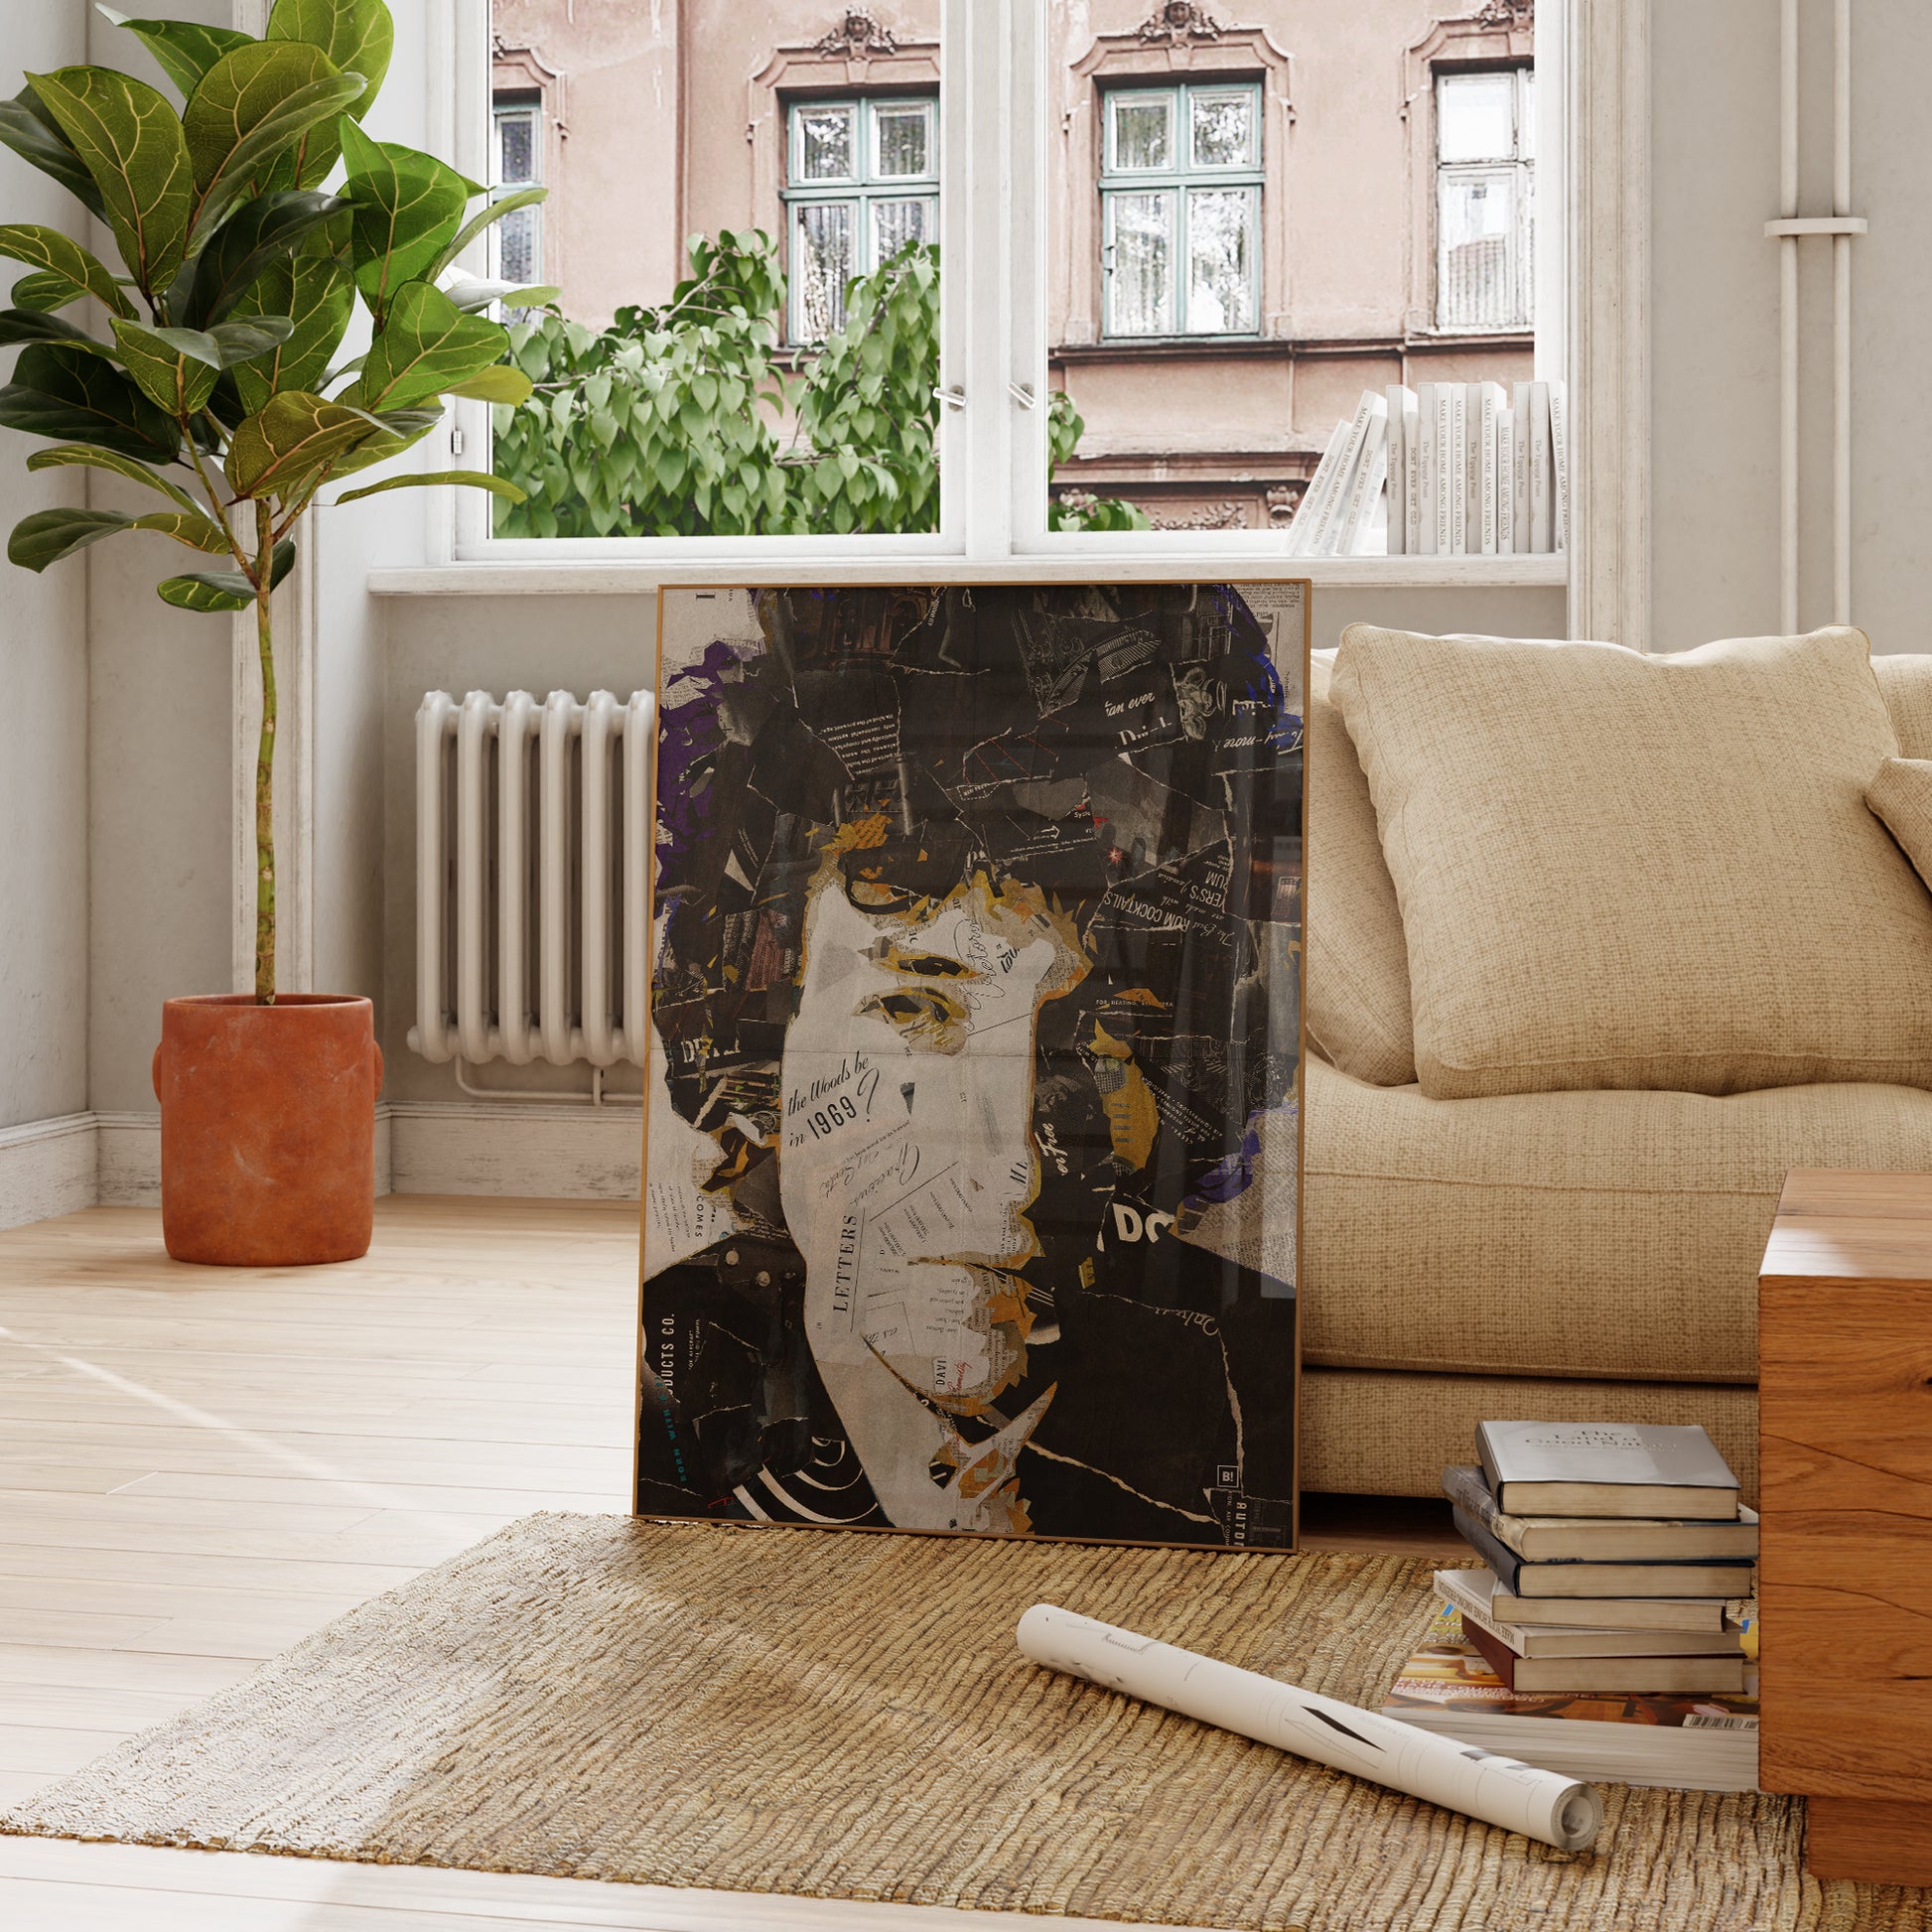 Be inspired by our iconic collage portrait art print of Bob Dylan. This artwork was printed using the giclée process on archival acid-free paper and is presented in a French living room, capturing its timeless beauty in every detail.